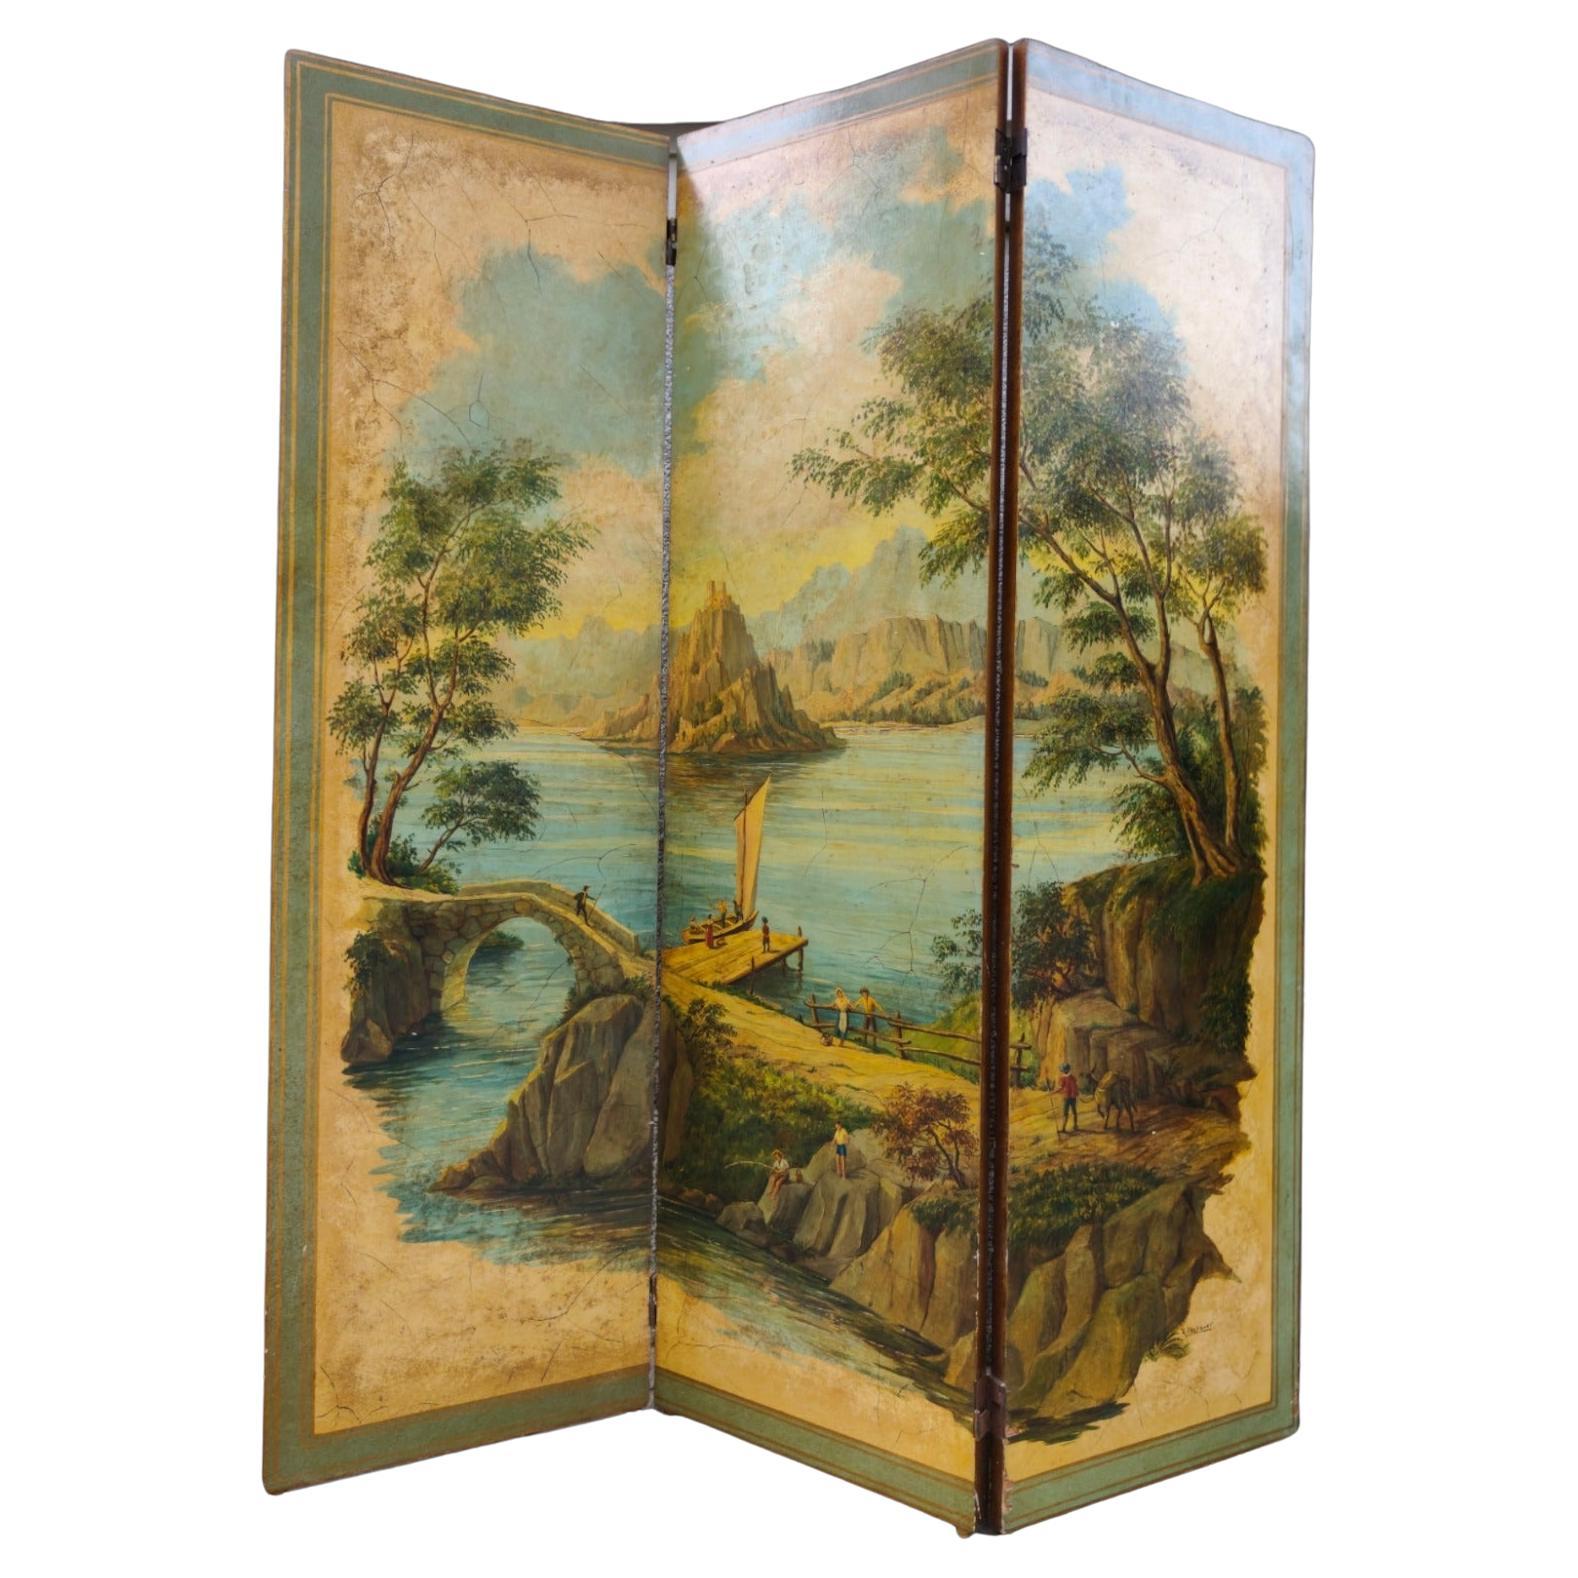 SIGNED HAND-PAINTED GERMAN SCREEN 20th Century